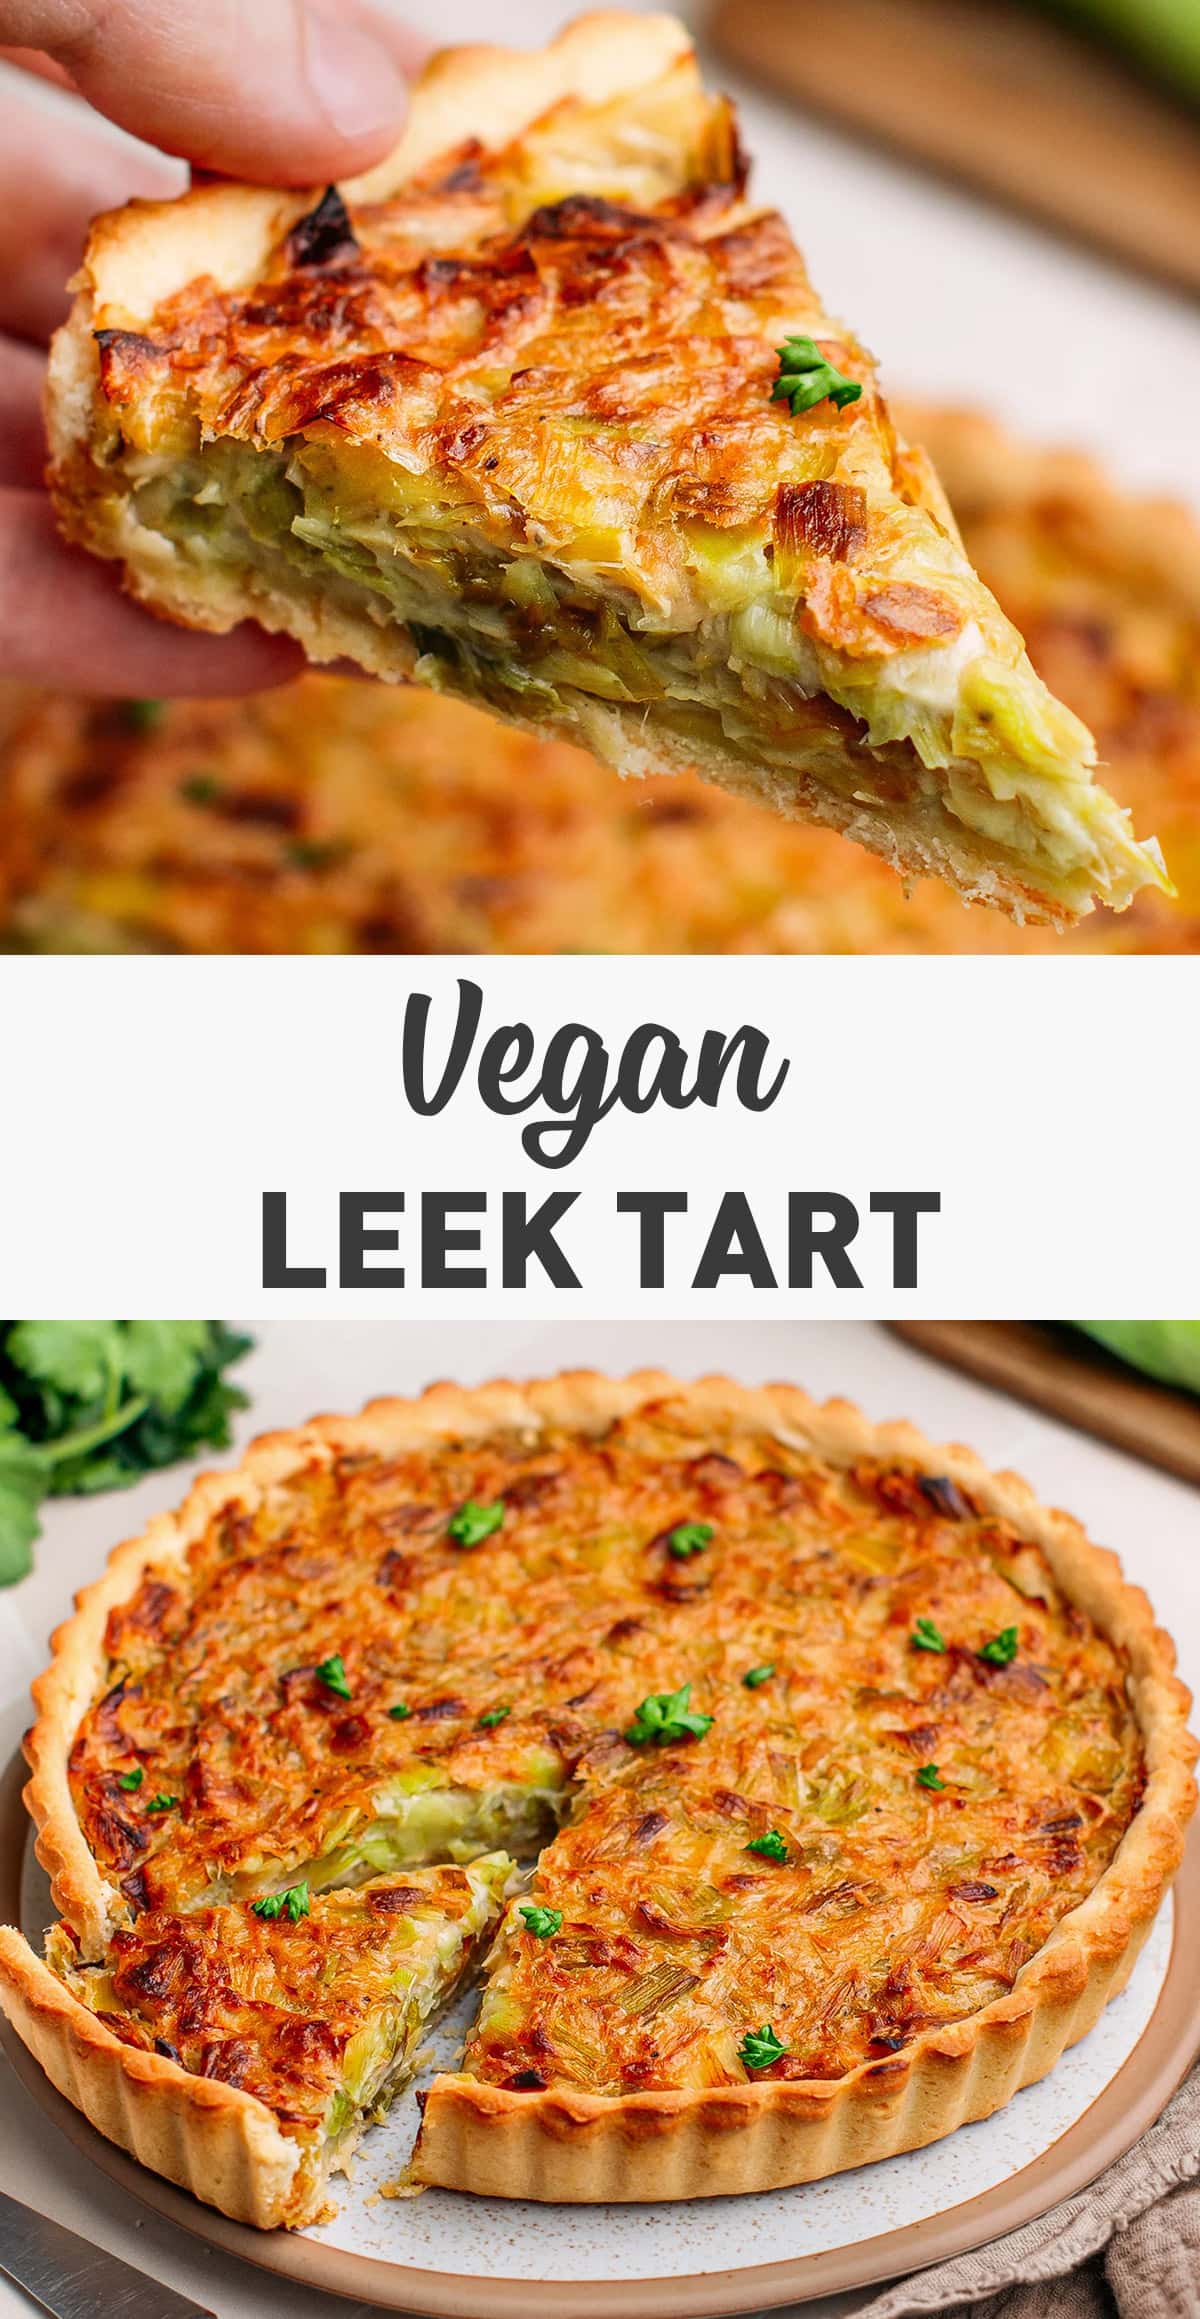 This French-inspired leek tart features a buttery and flaky shortcrust pastry filled with tender caramelized leeks and cashew cream. It's savory, rich, and so hearty! Serve it warm as a main with a green salad or chilled as an appetizer! #leektart #vegan